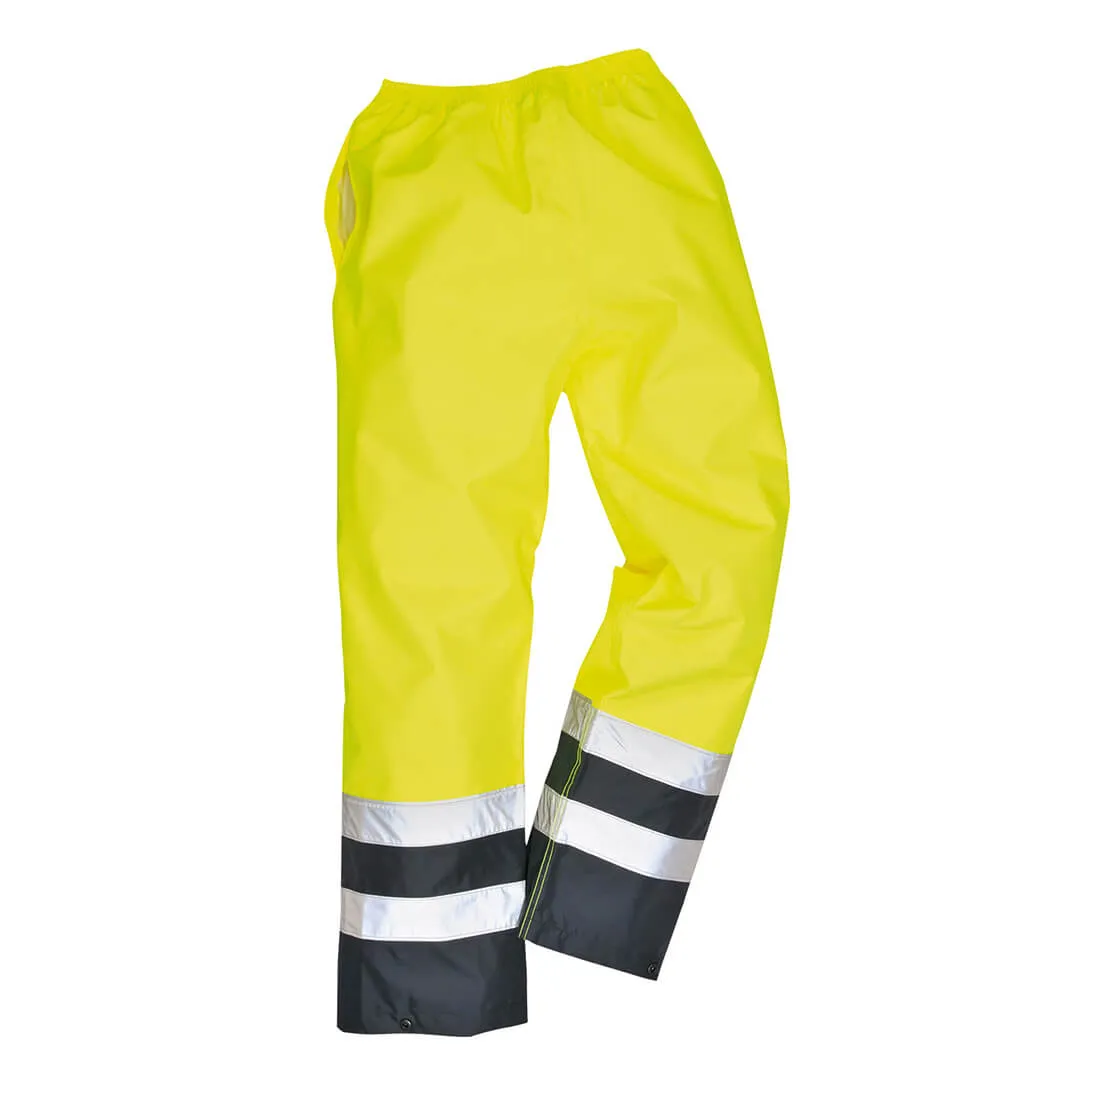 Oxford Weave 300D Class 2 Two Tone Hi Vis Trousers - Yellow / Navy, XL